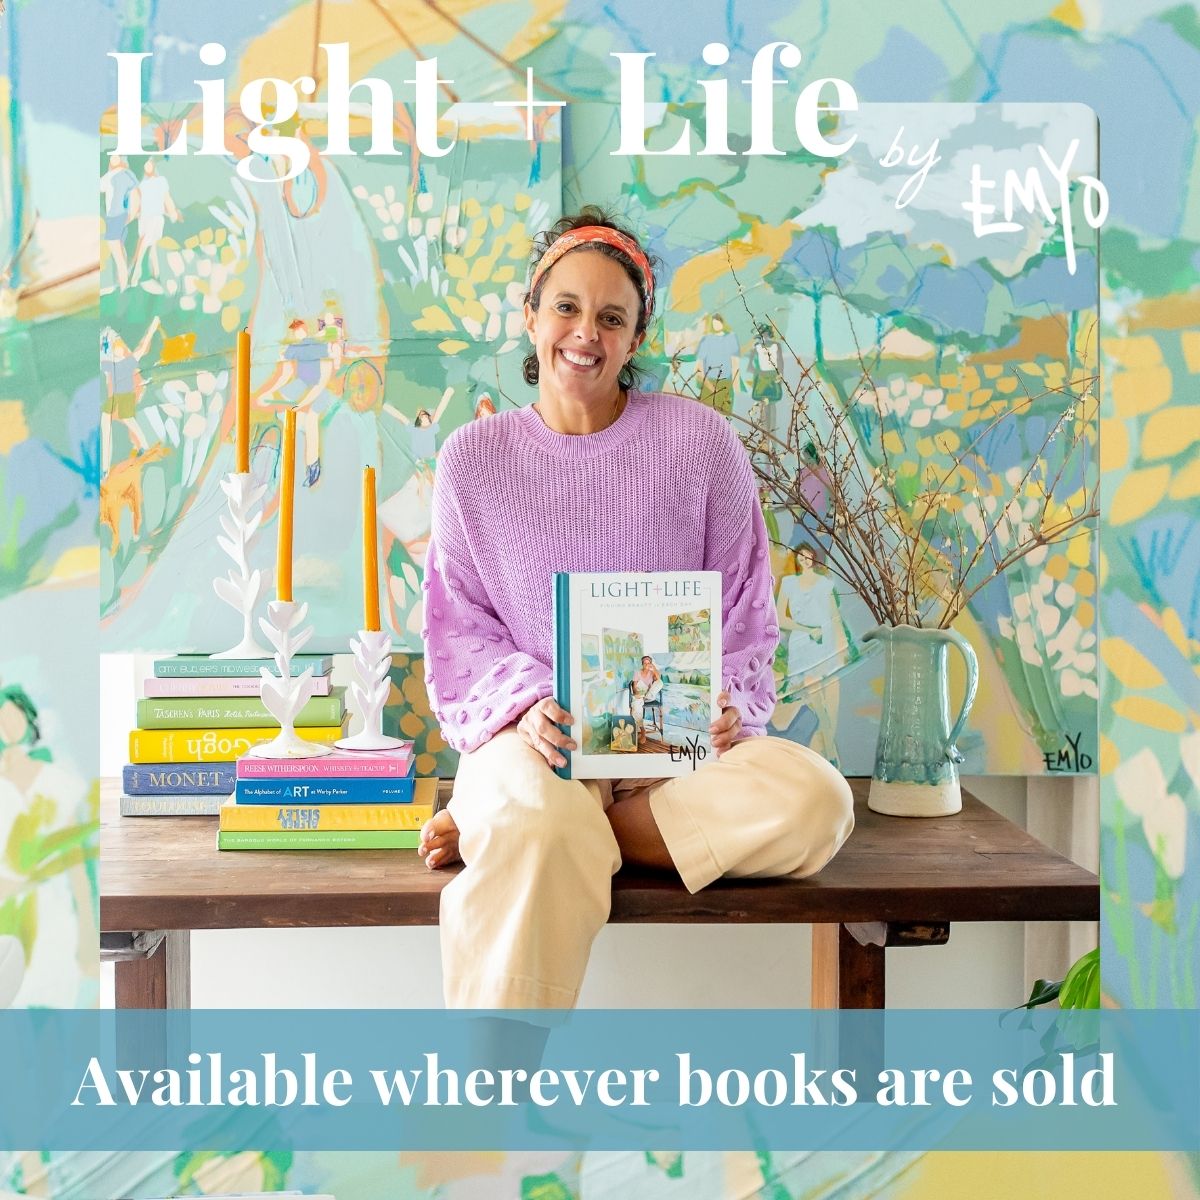 Happy #PubDay to 'Light + Life' by Emily “EMYO” Ozier!

Join us in celebrating the release of this beautiful book that captures the essence of finding beauty in each day.

Follow along on our Instagram Stories for a special Author Takeover Day with EMYO!

#LightAndLife #newbook